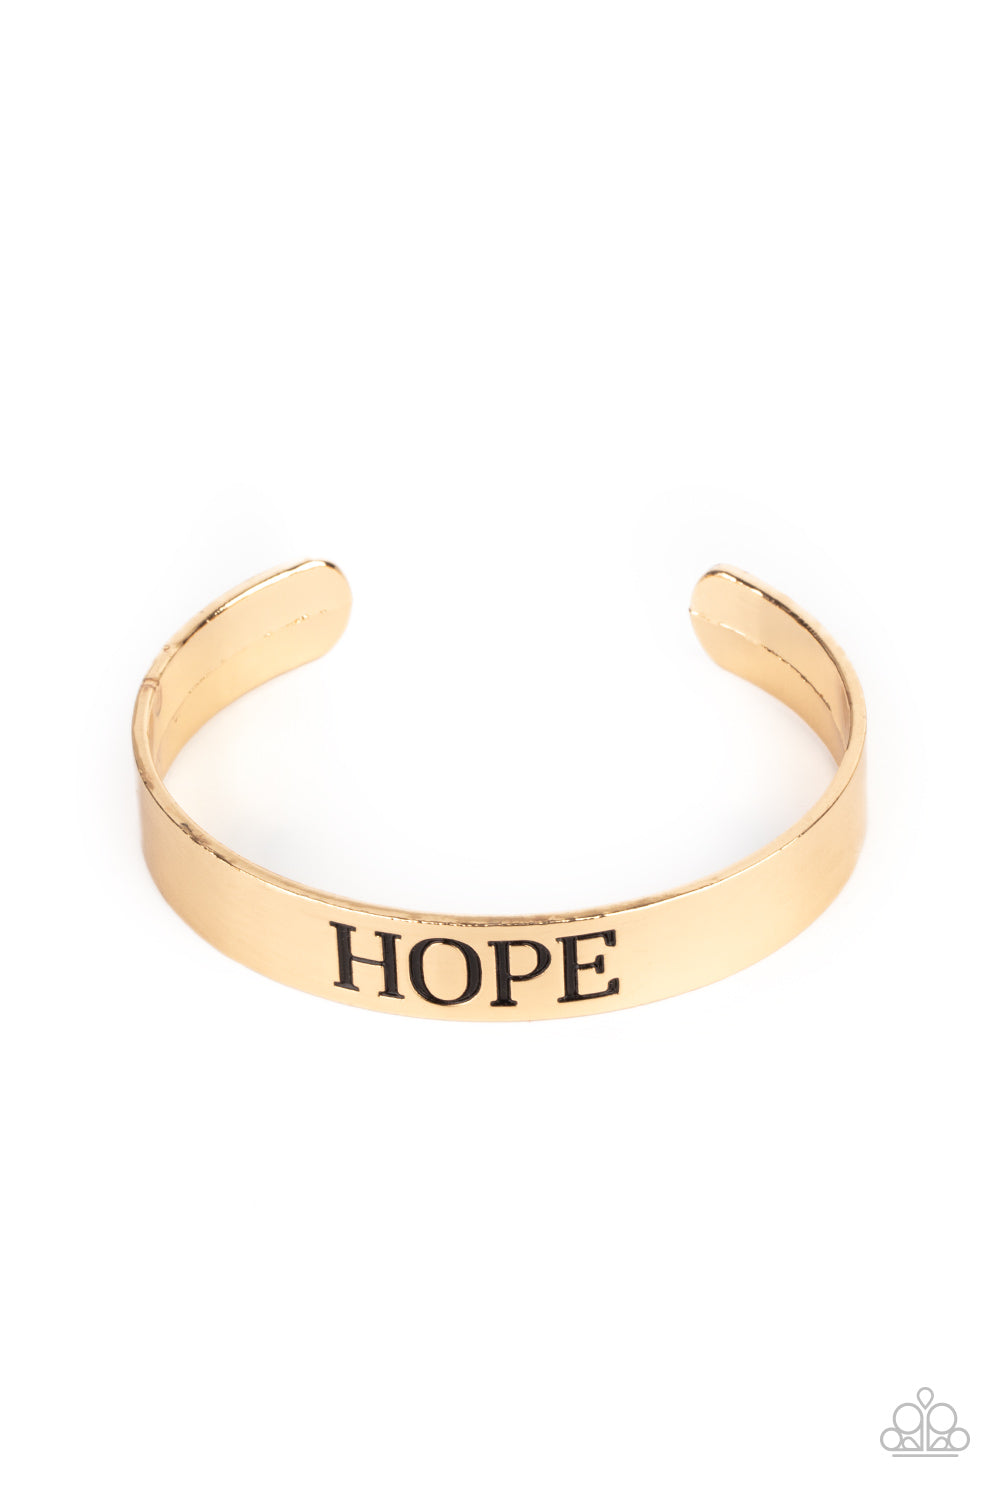 Hope Makes The World Go Round - Gold 💕0775